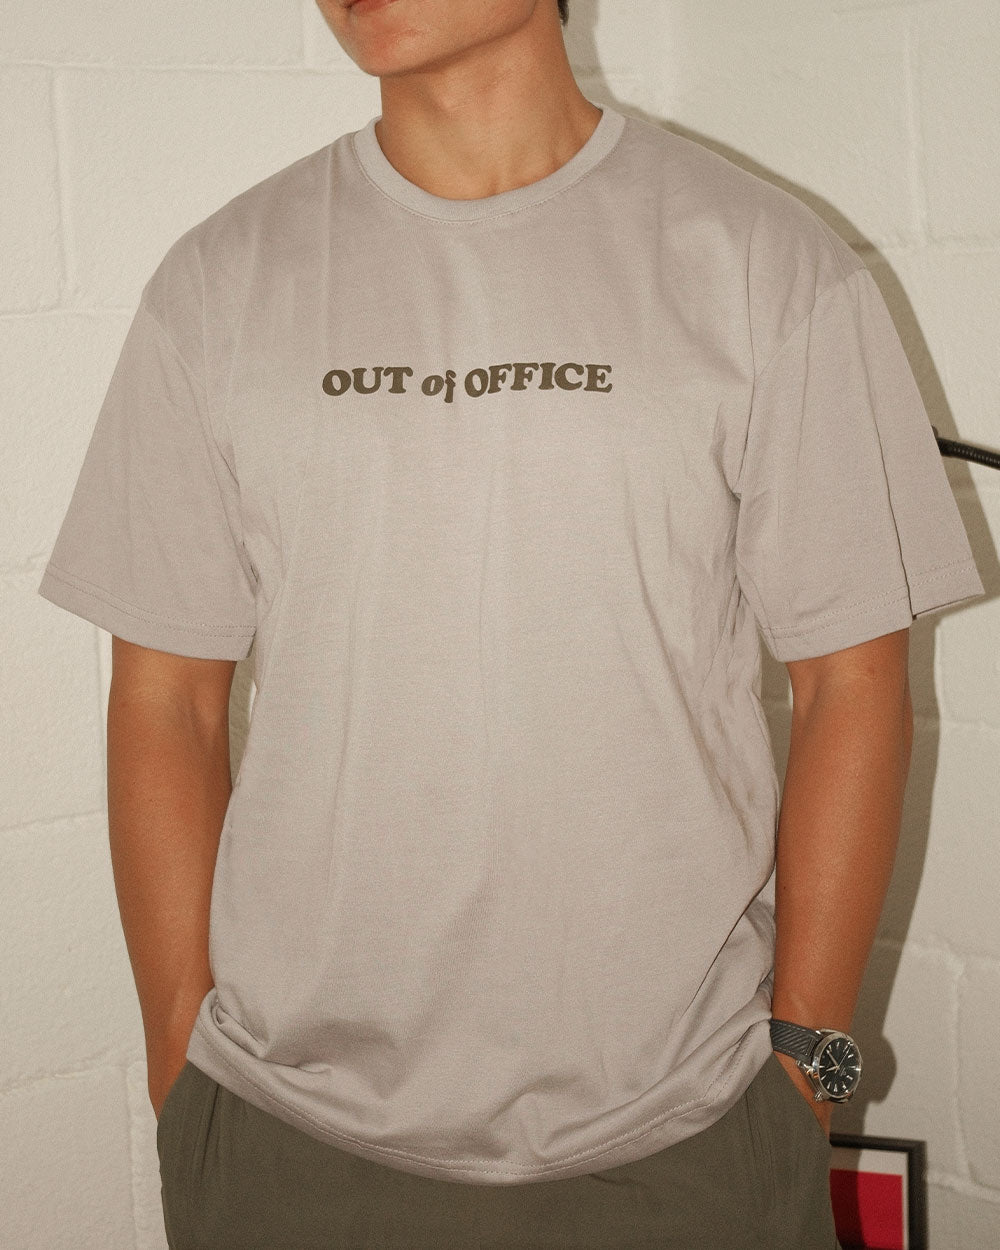 man in a grey t shirt that says out of office